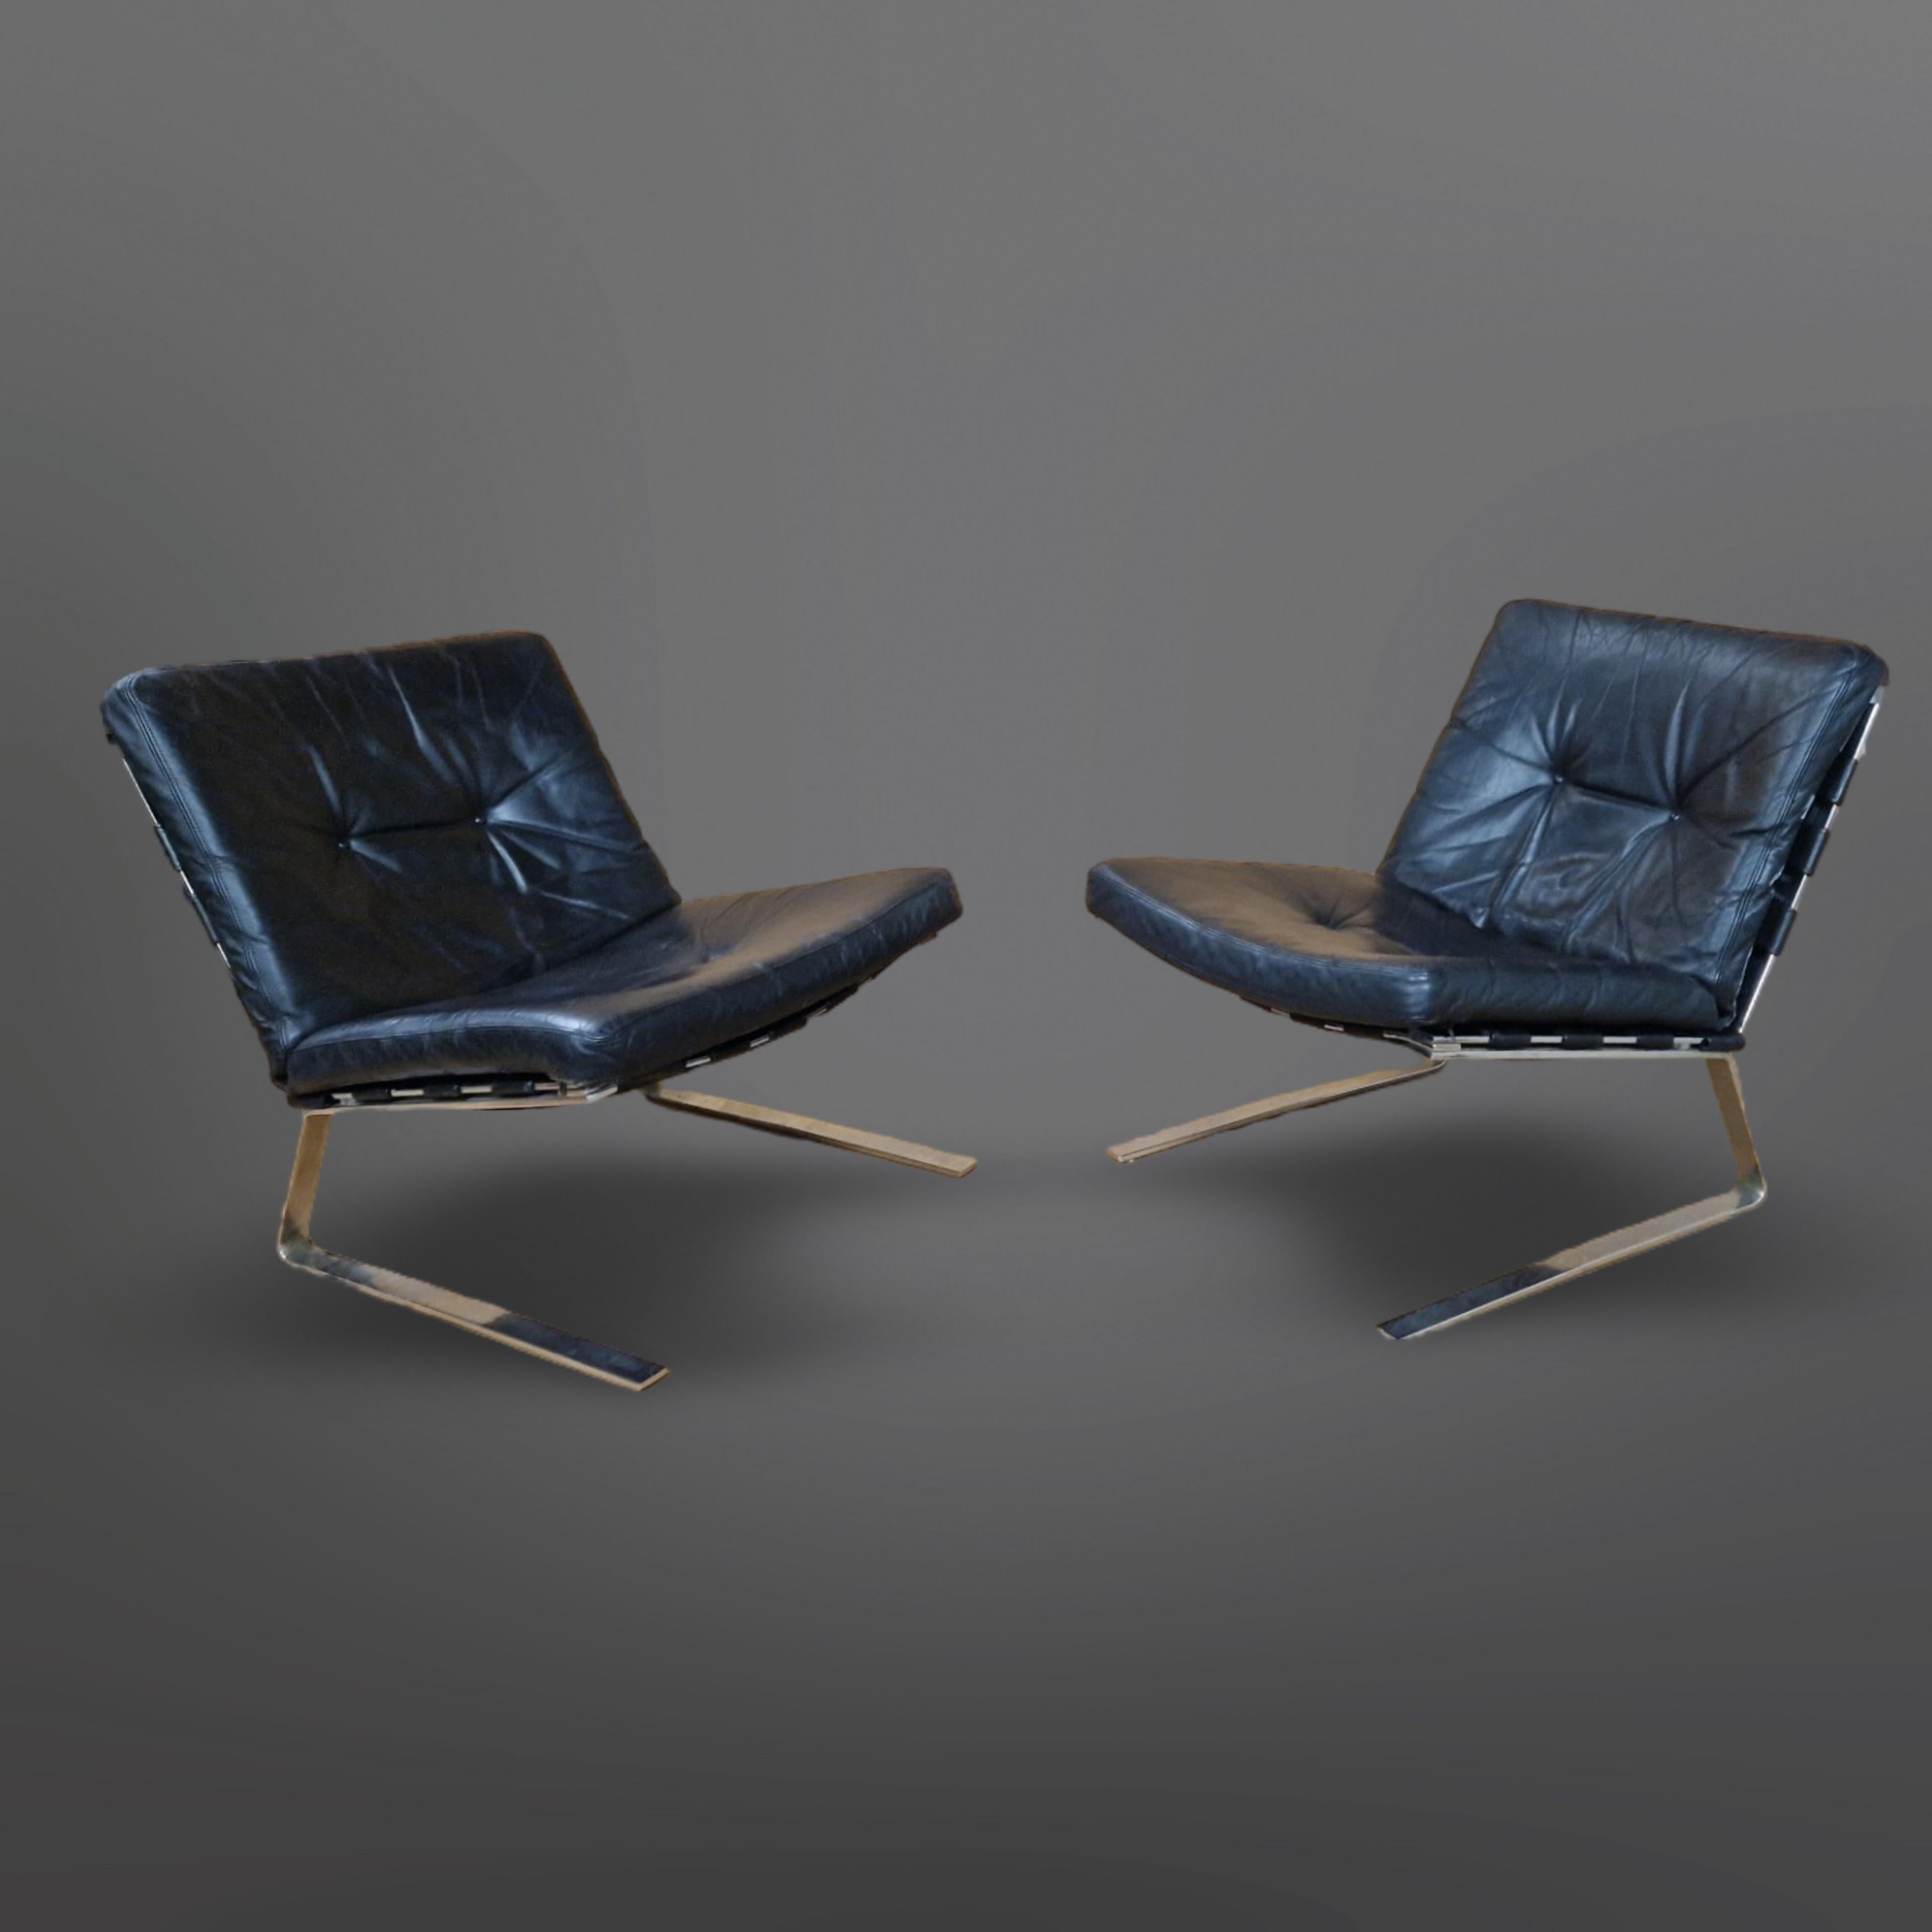 Steel Set of 2 steel and leather lounge chairs, Germany 1960s